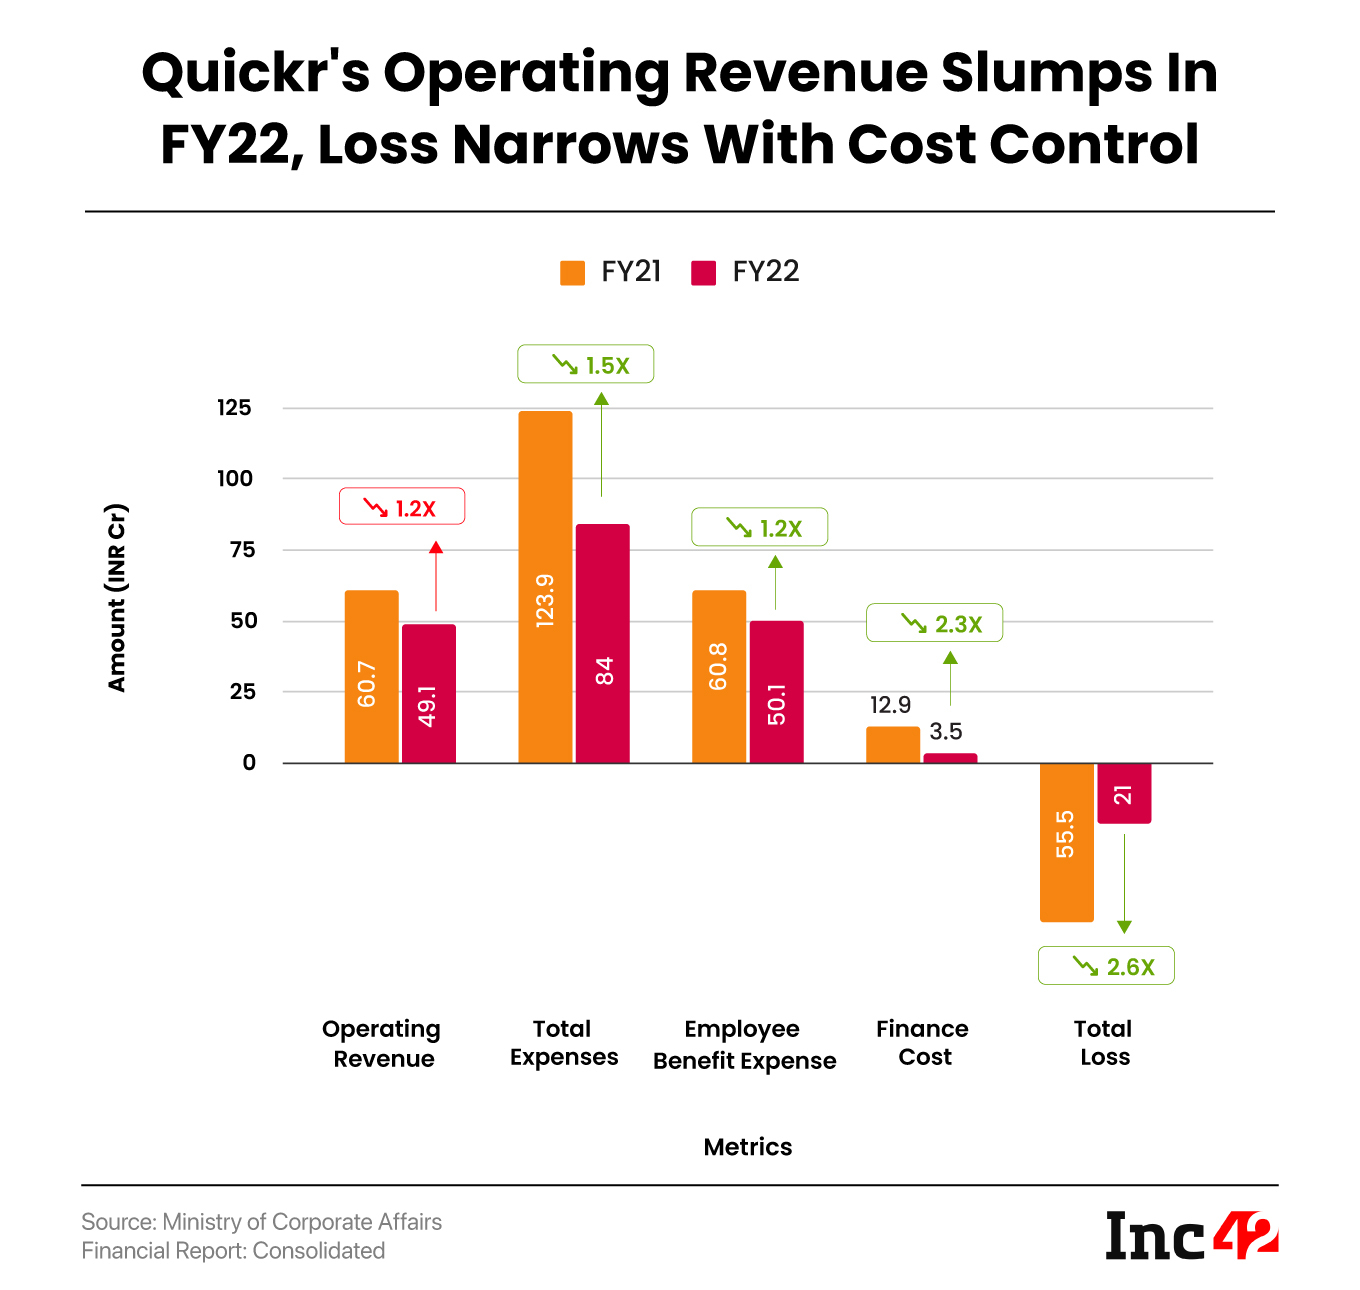 Quickr's Operating Revenue Slumps In FY22, Loss Narrows With Cost Control